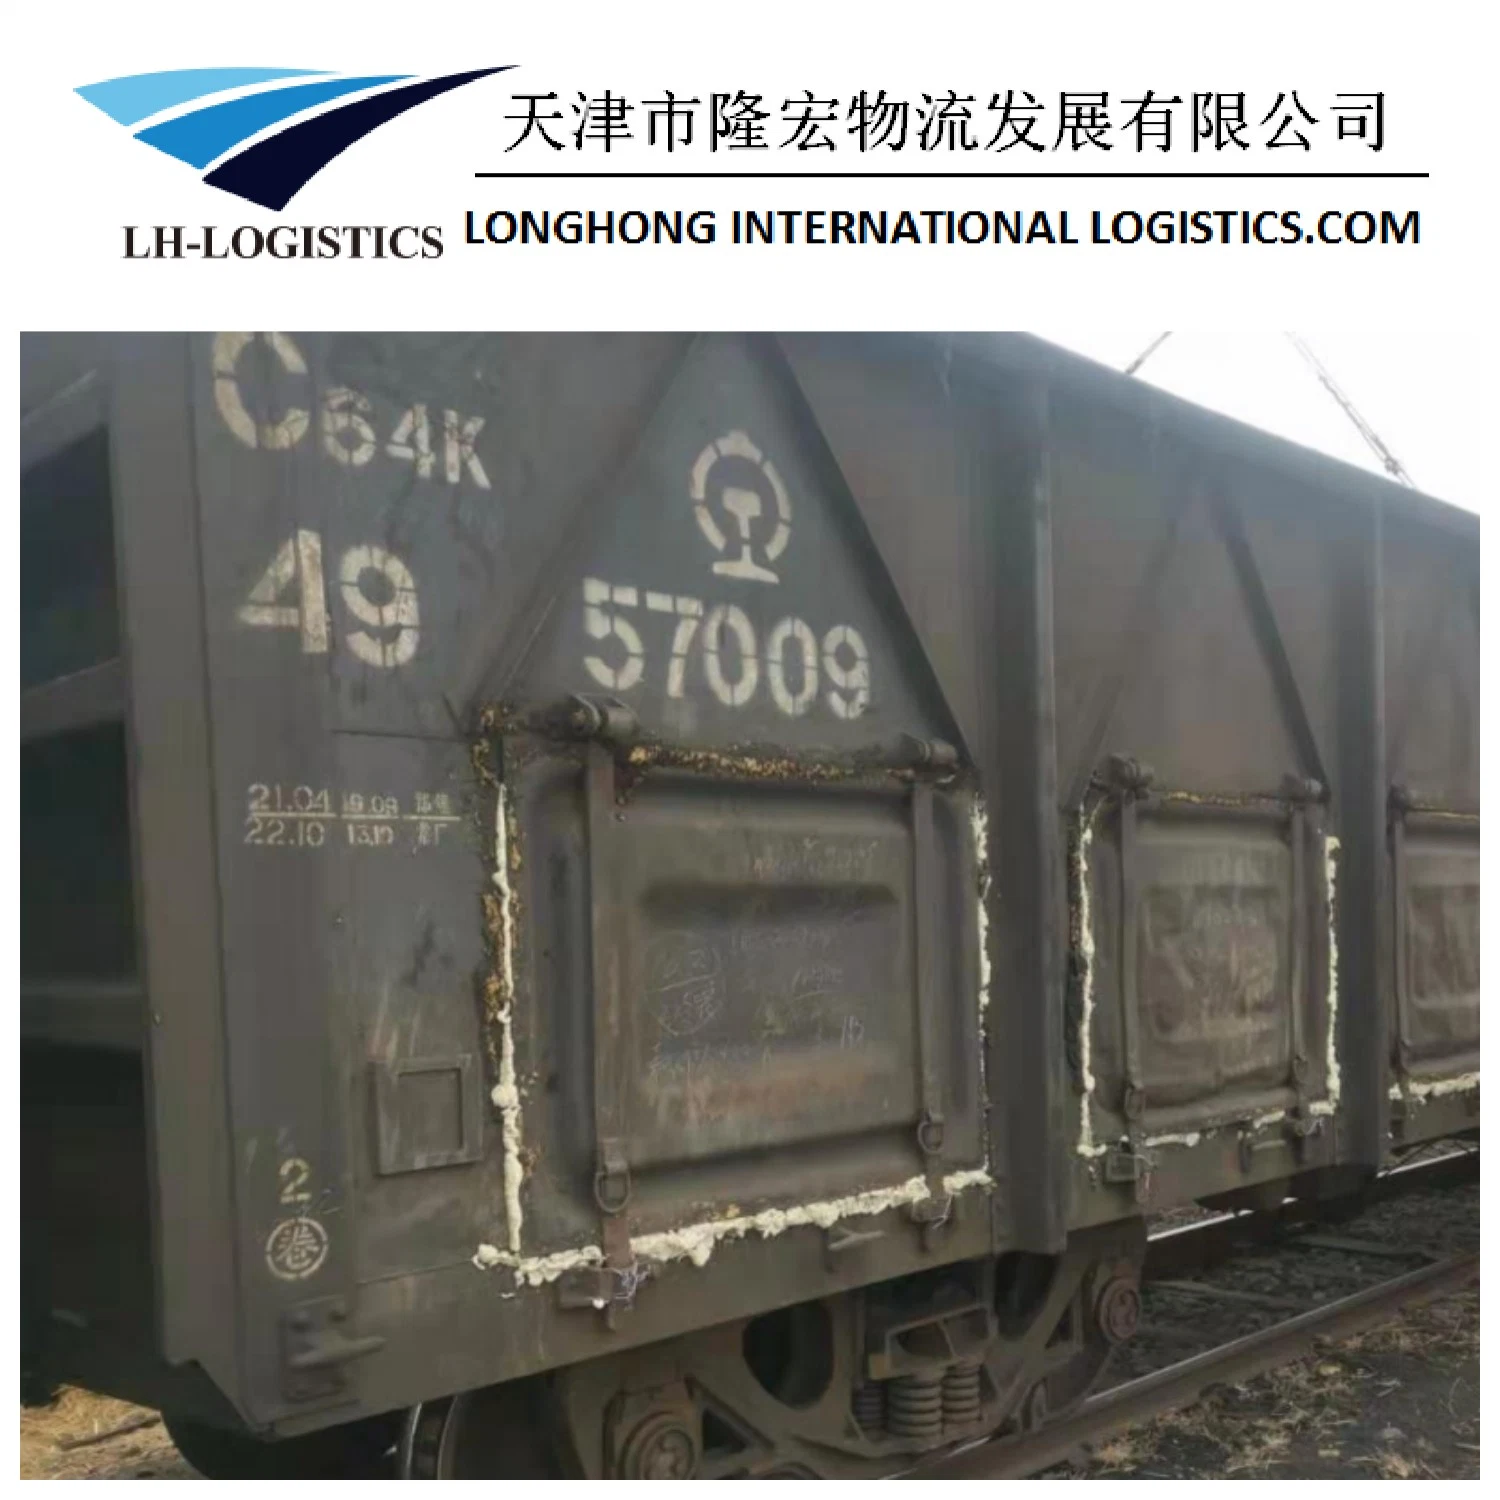 China Logistics Rail Freight Agentsrailway Shipping From China to Central Asia